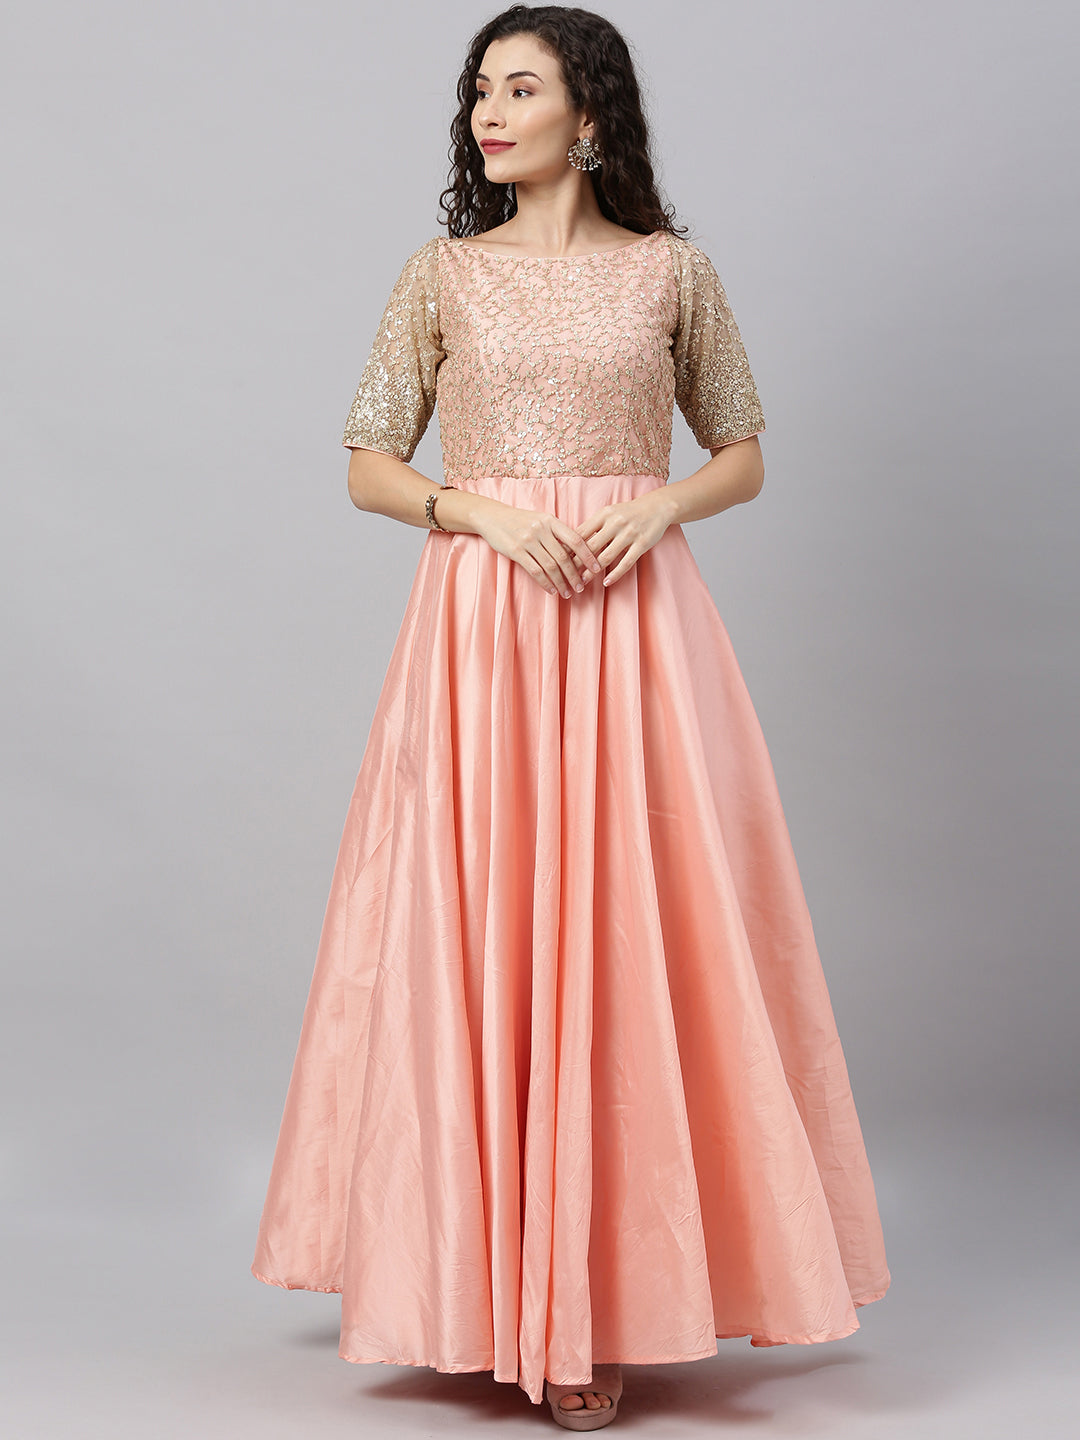 Beige-and-Peach-Contrast-Embroidered-Gown